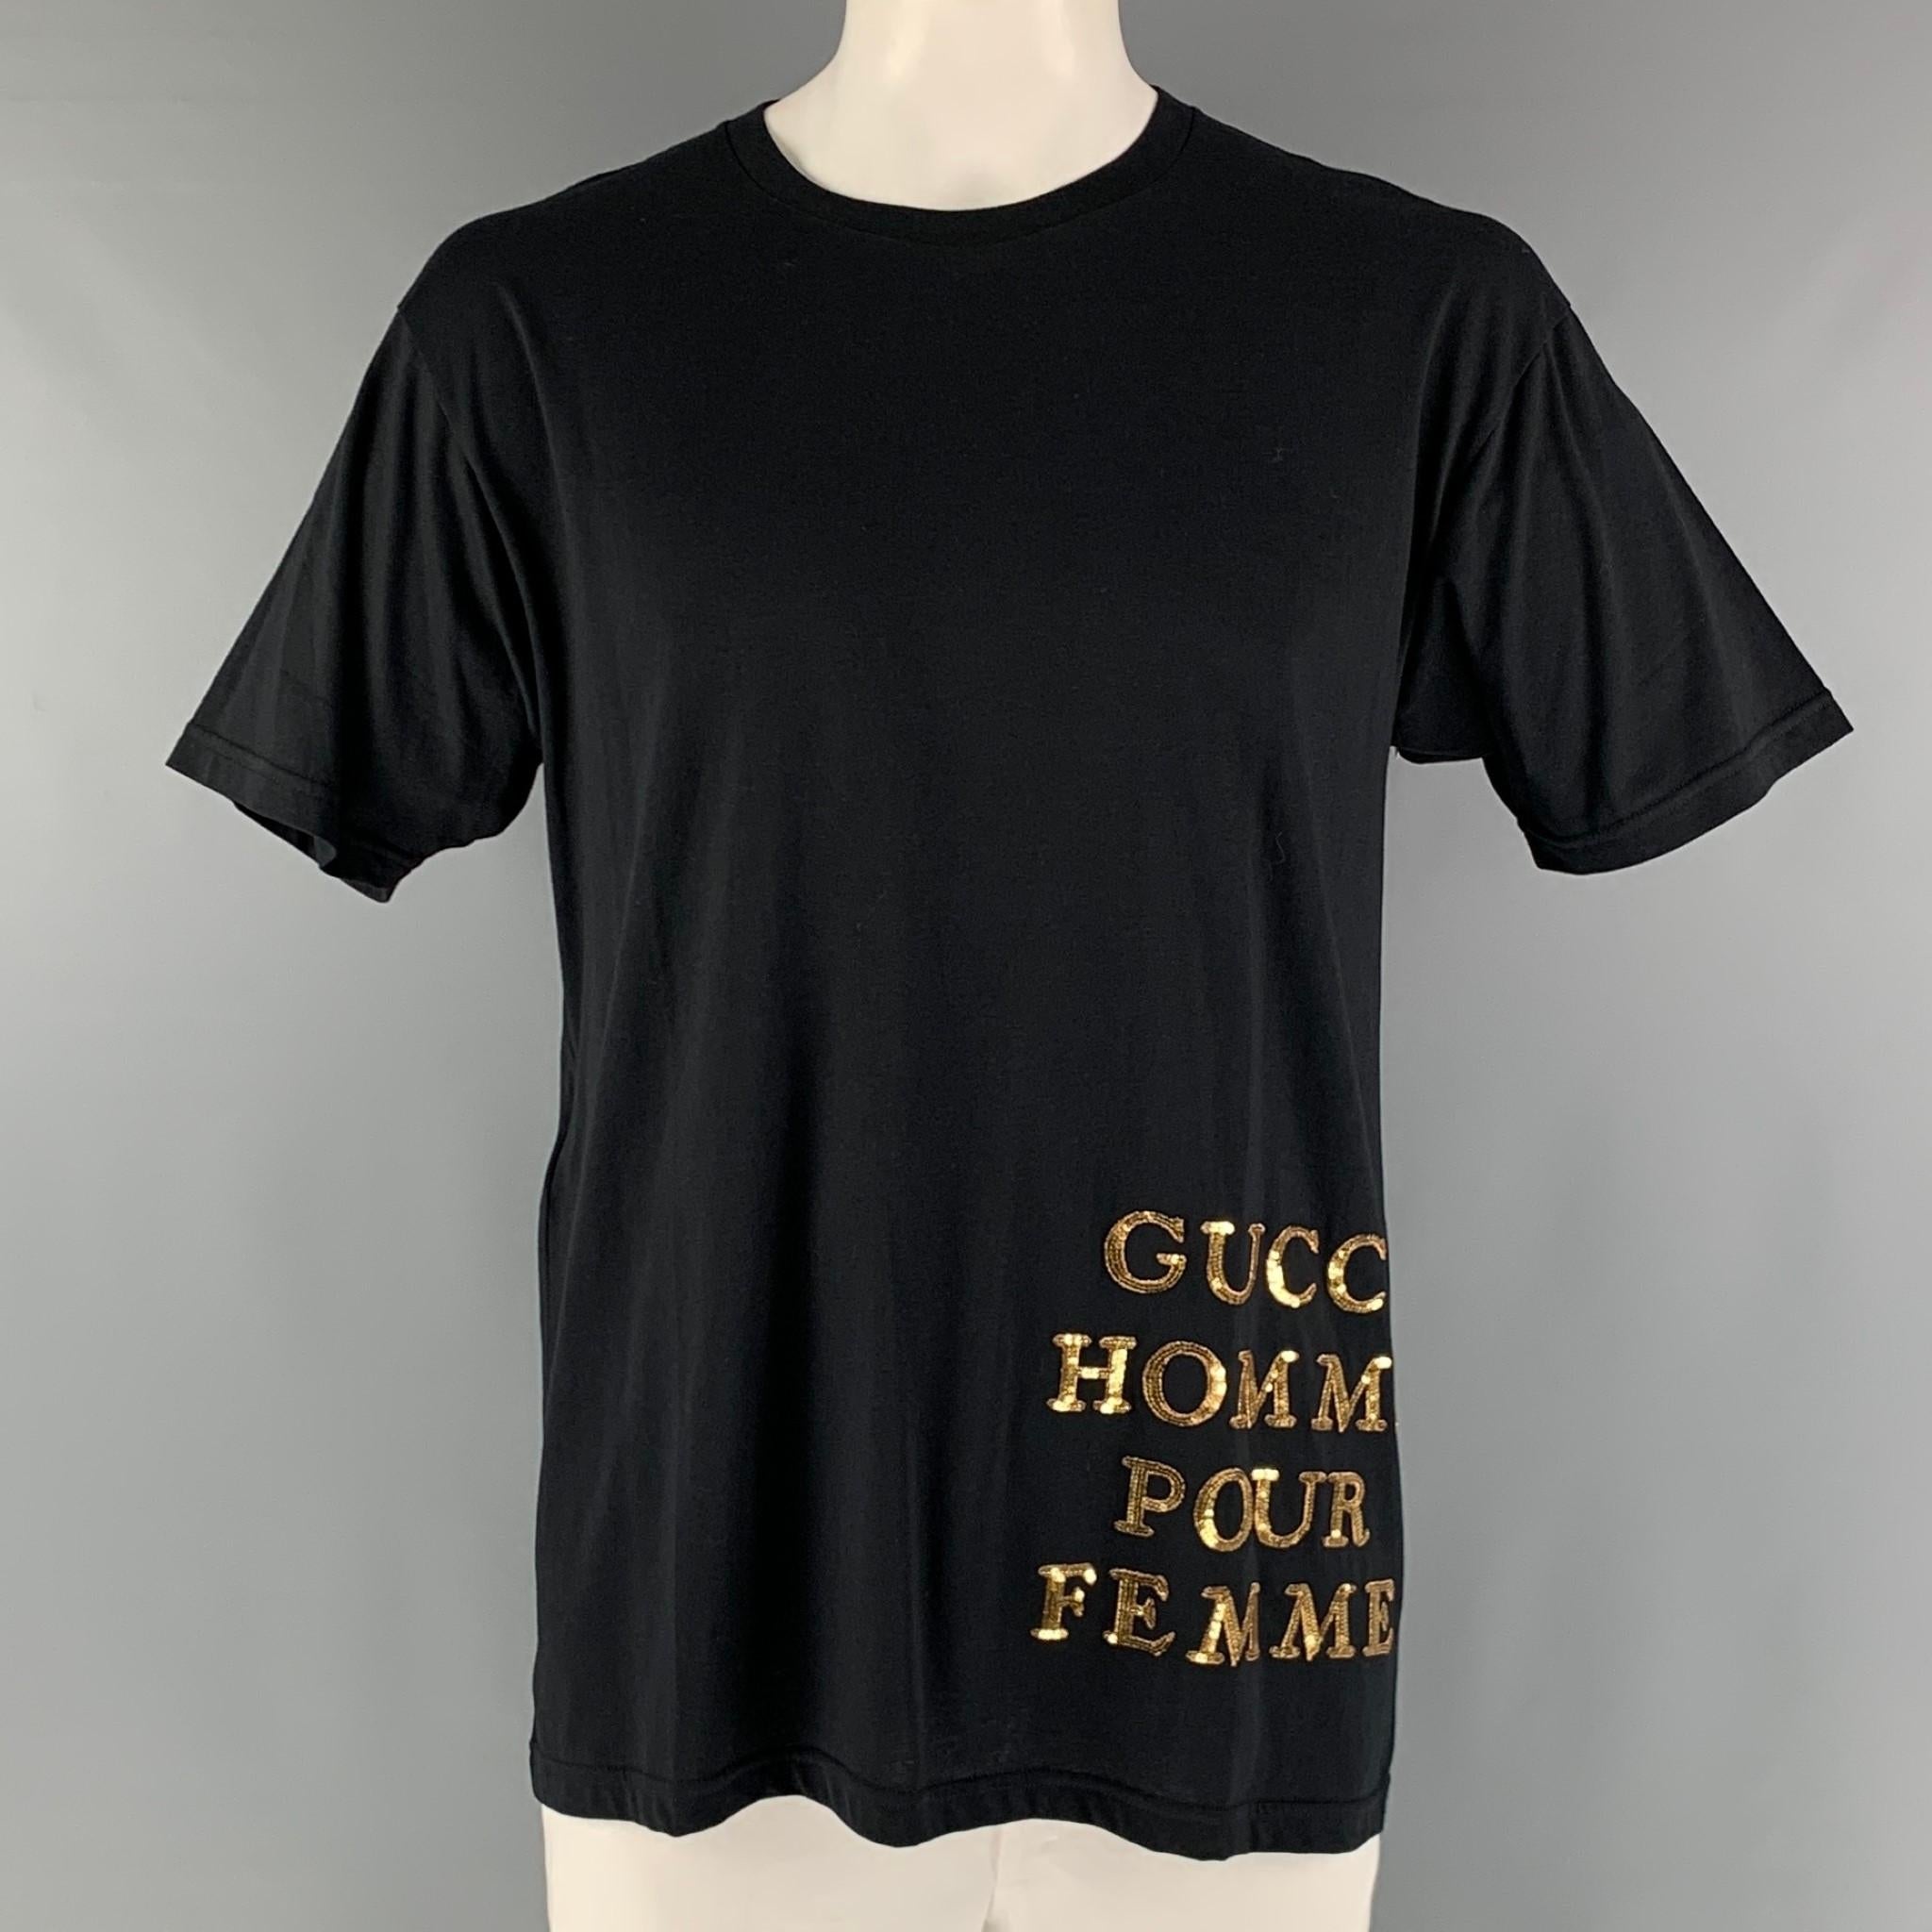 GUCCI oversized t-shirt comes in a black jersey cotton knit material featuring a gold tone embroidery phrase 